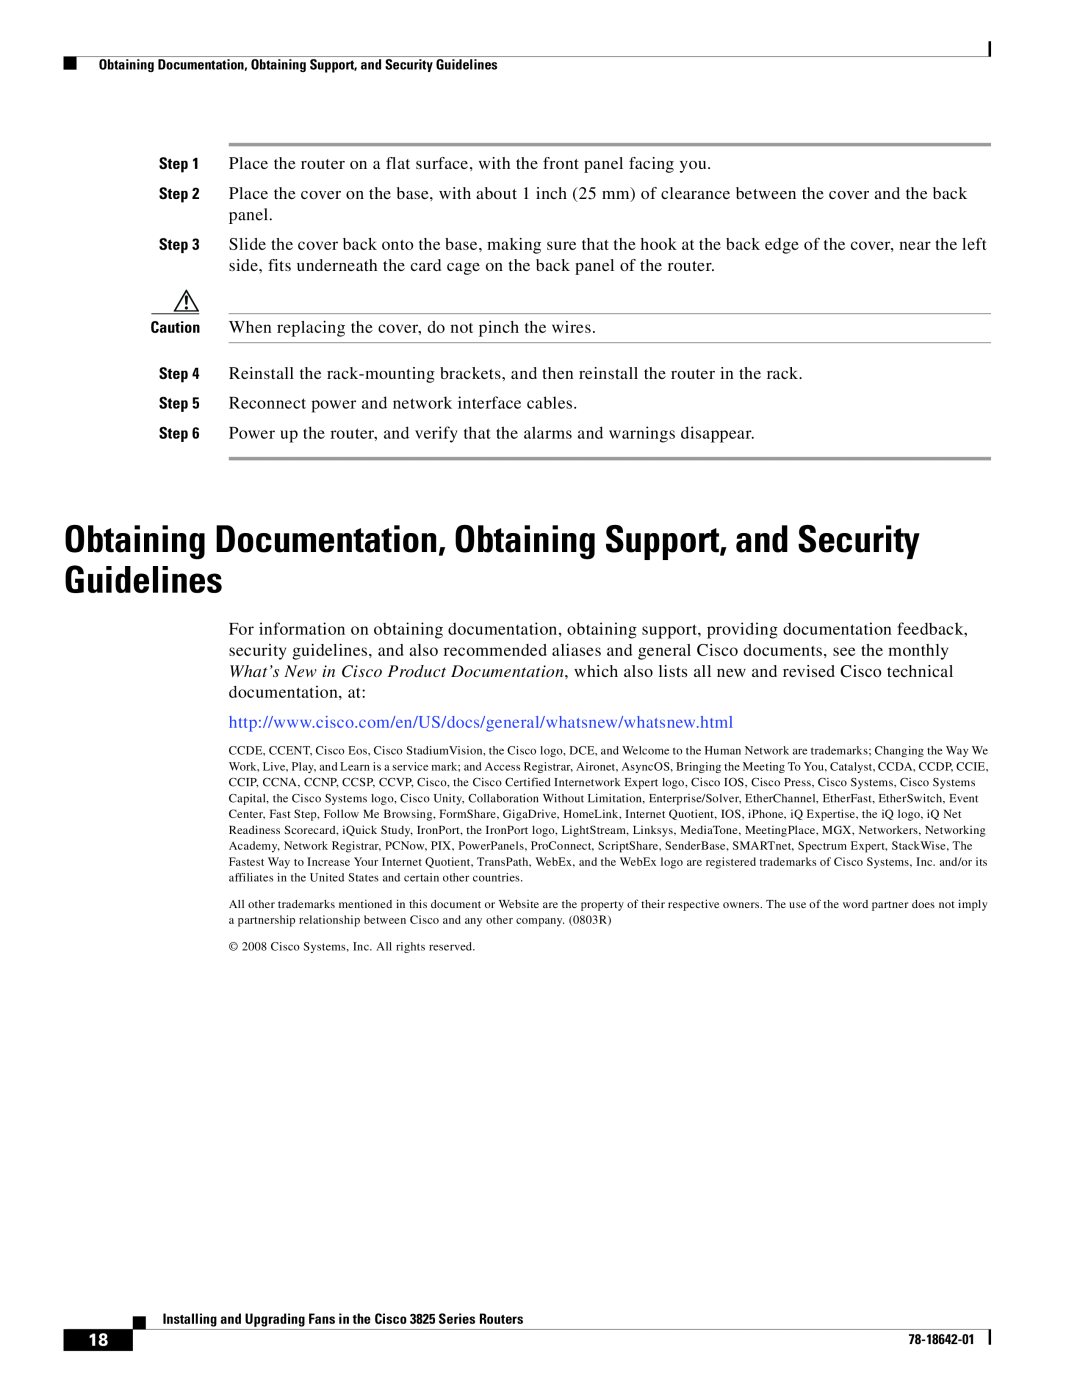 Cisco Systems 3825 Series manual Obtaining Documentation, Obtaining Support, and Security Guidelines 